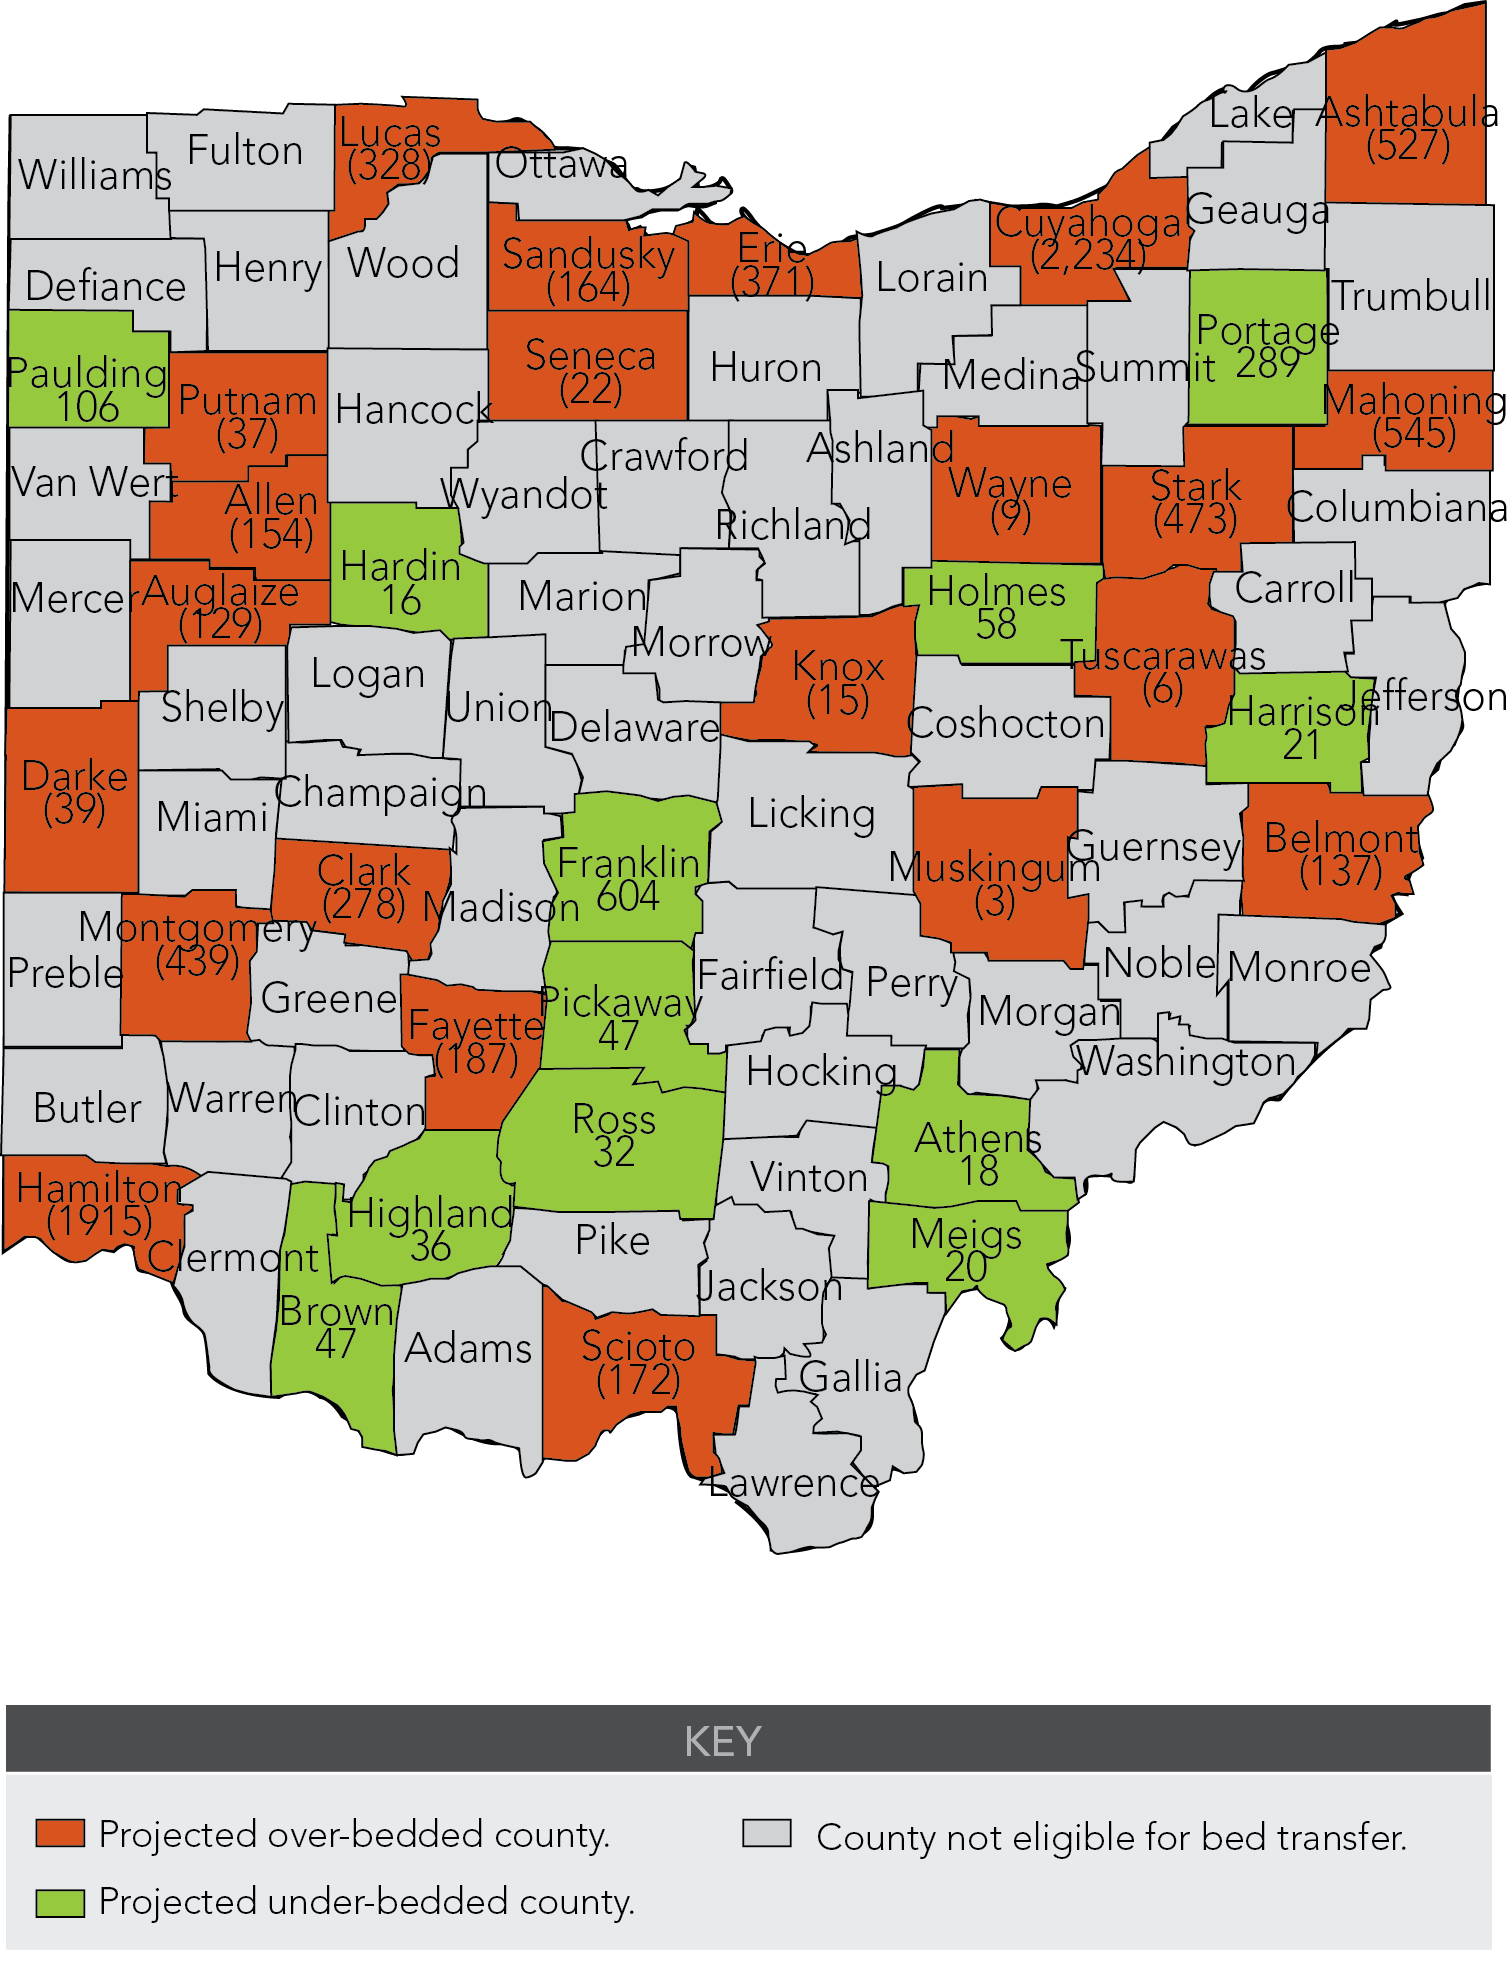 Estimated Ohio nursing home bed need vs. excess results map for 2016